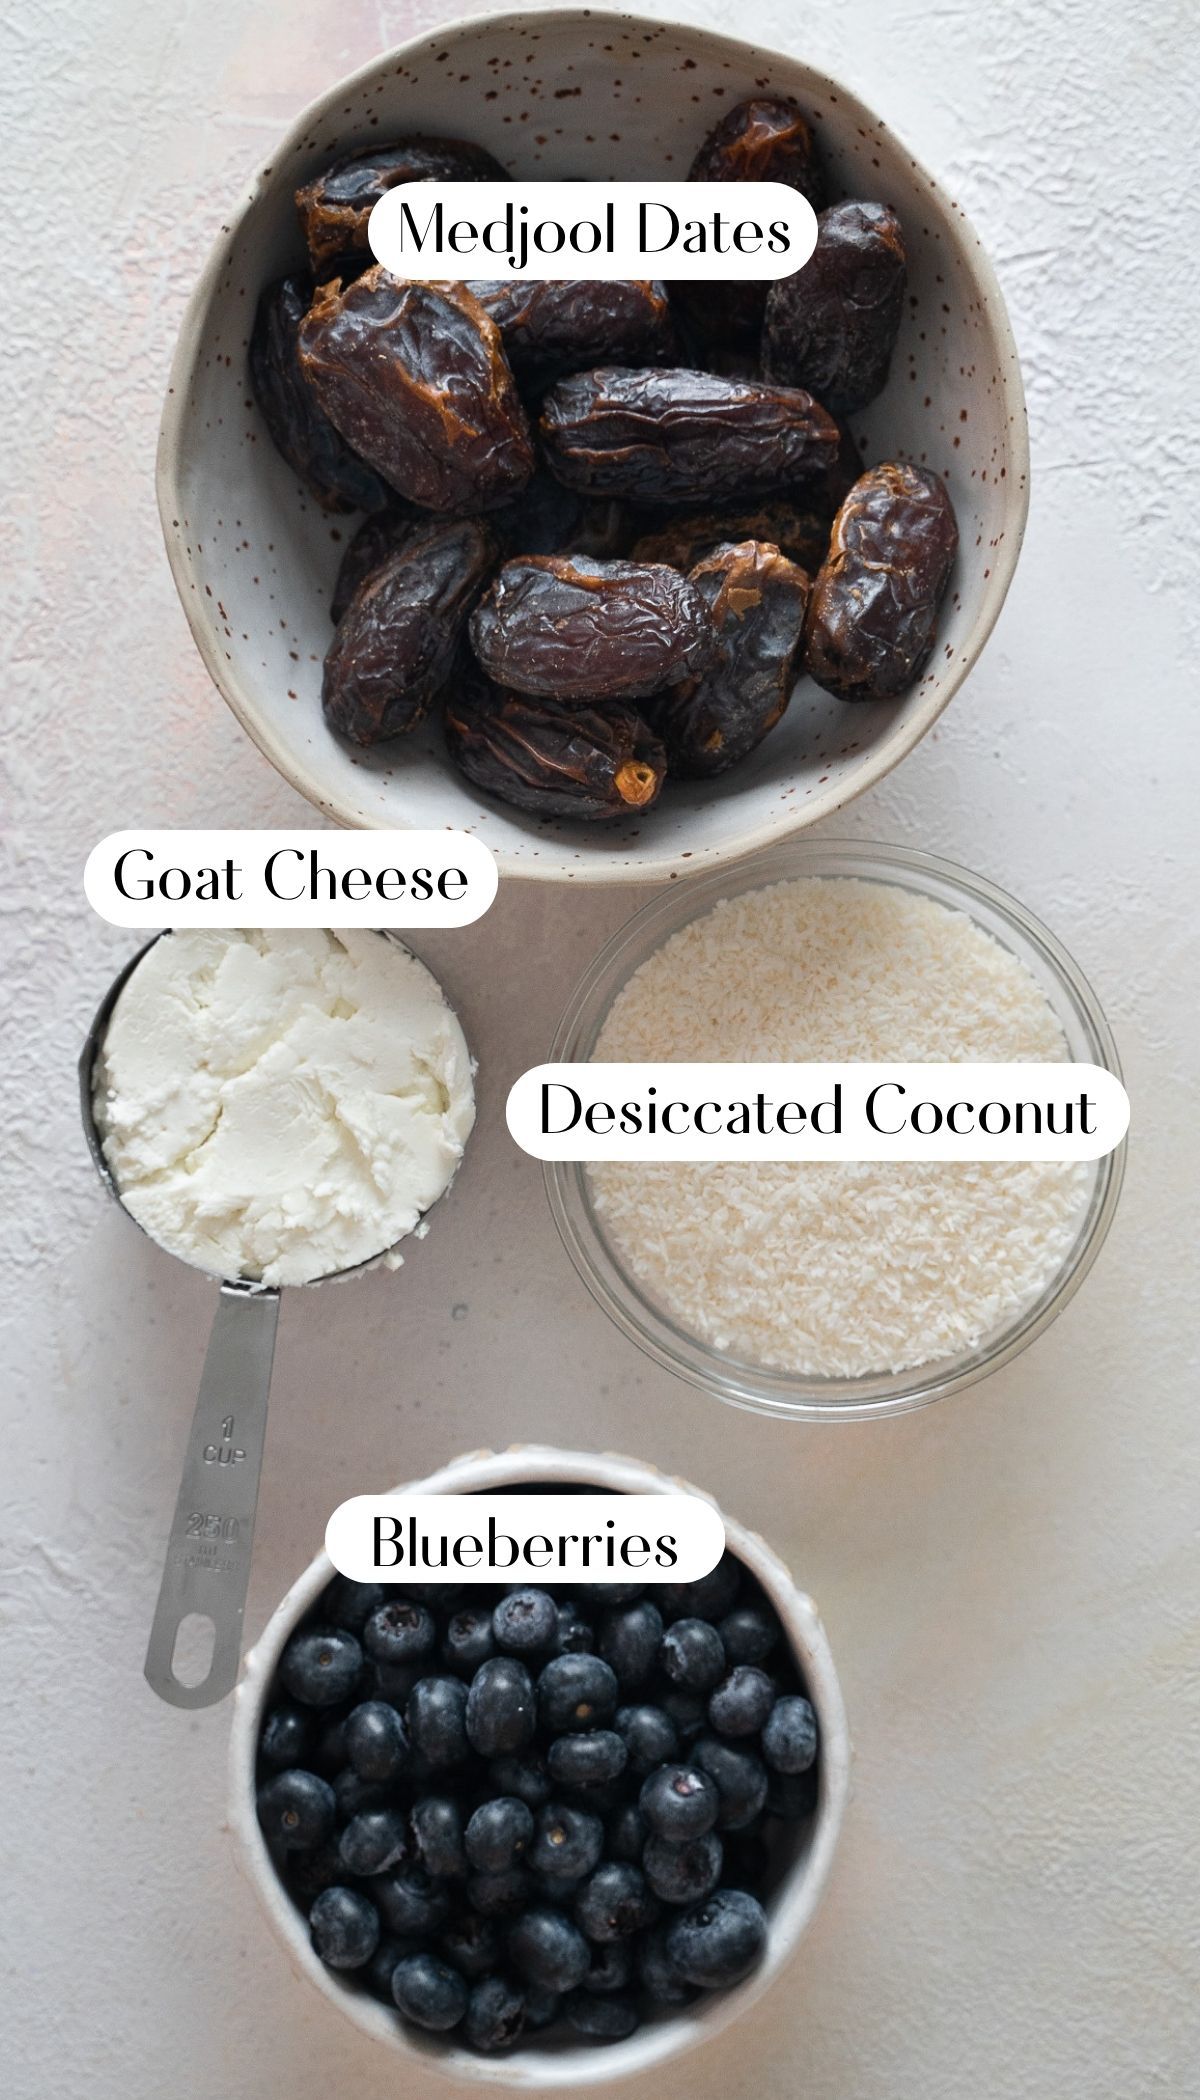 ingredients for Goat Cheese Stuffed Dates